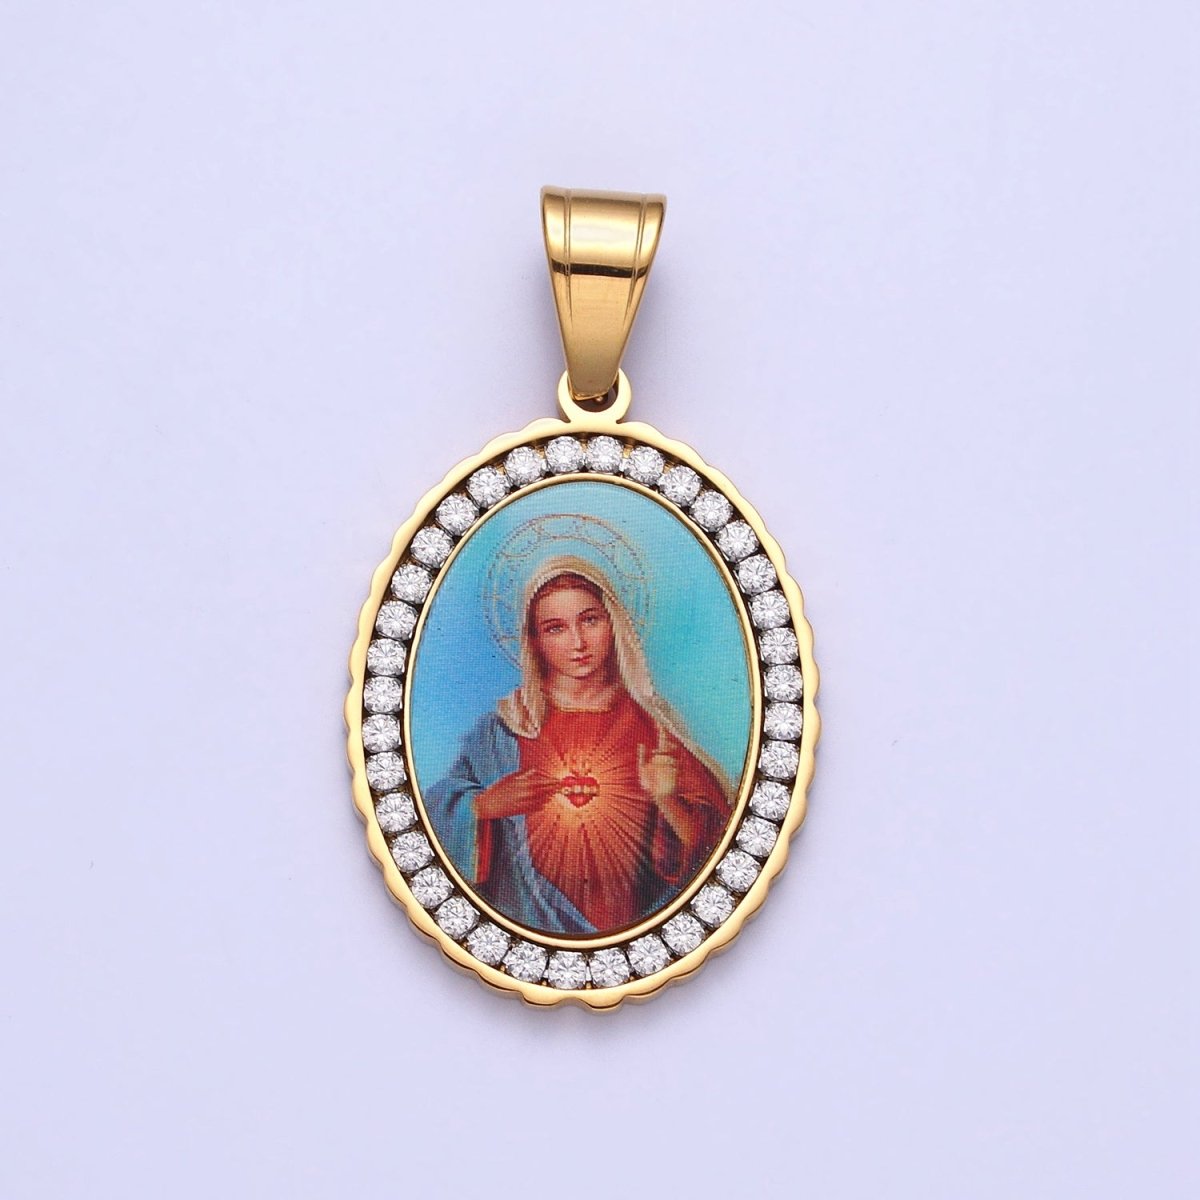 Stainless Steel Mother Virgin Mary Sacred Heart Micro Paved CZ Oval Pendant in Gold & Silver Religious Jewelry J-778 J-779 - DLUXCA